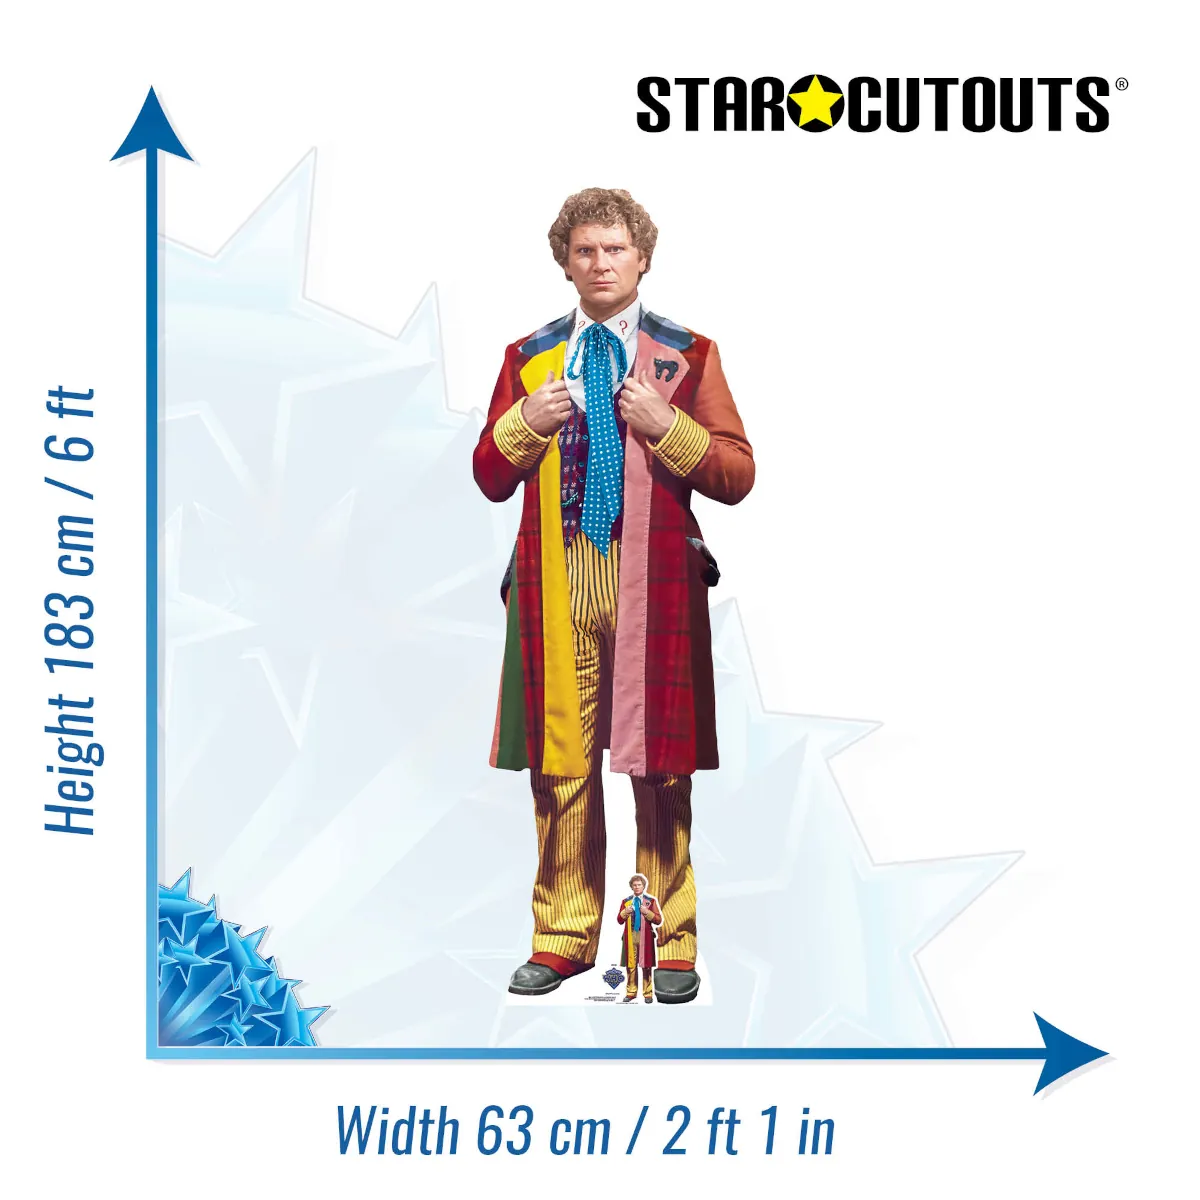 SC4647 The Sixth Doctor 'Colin Baker' (Doctor Who) Official Lifesize + Mini Cardboard Cutout Standee Size